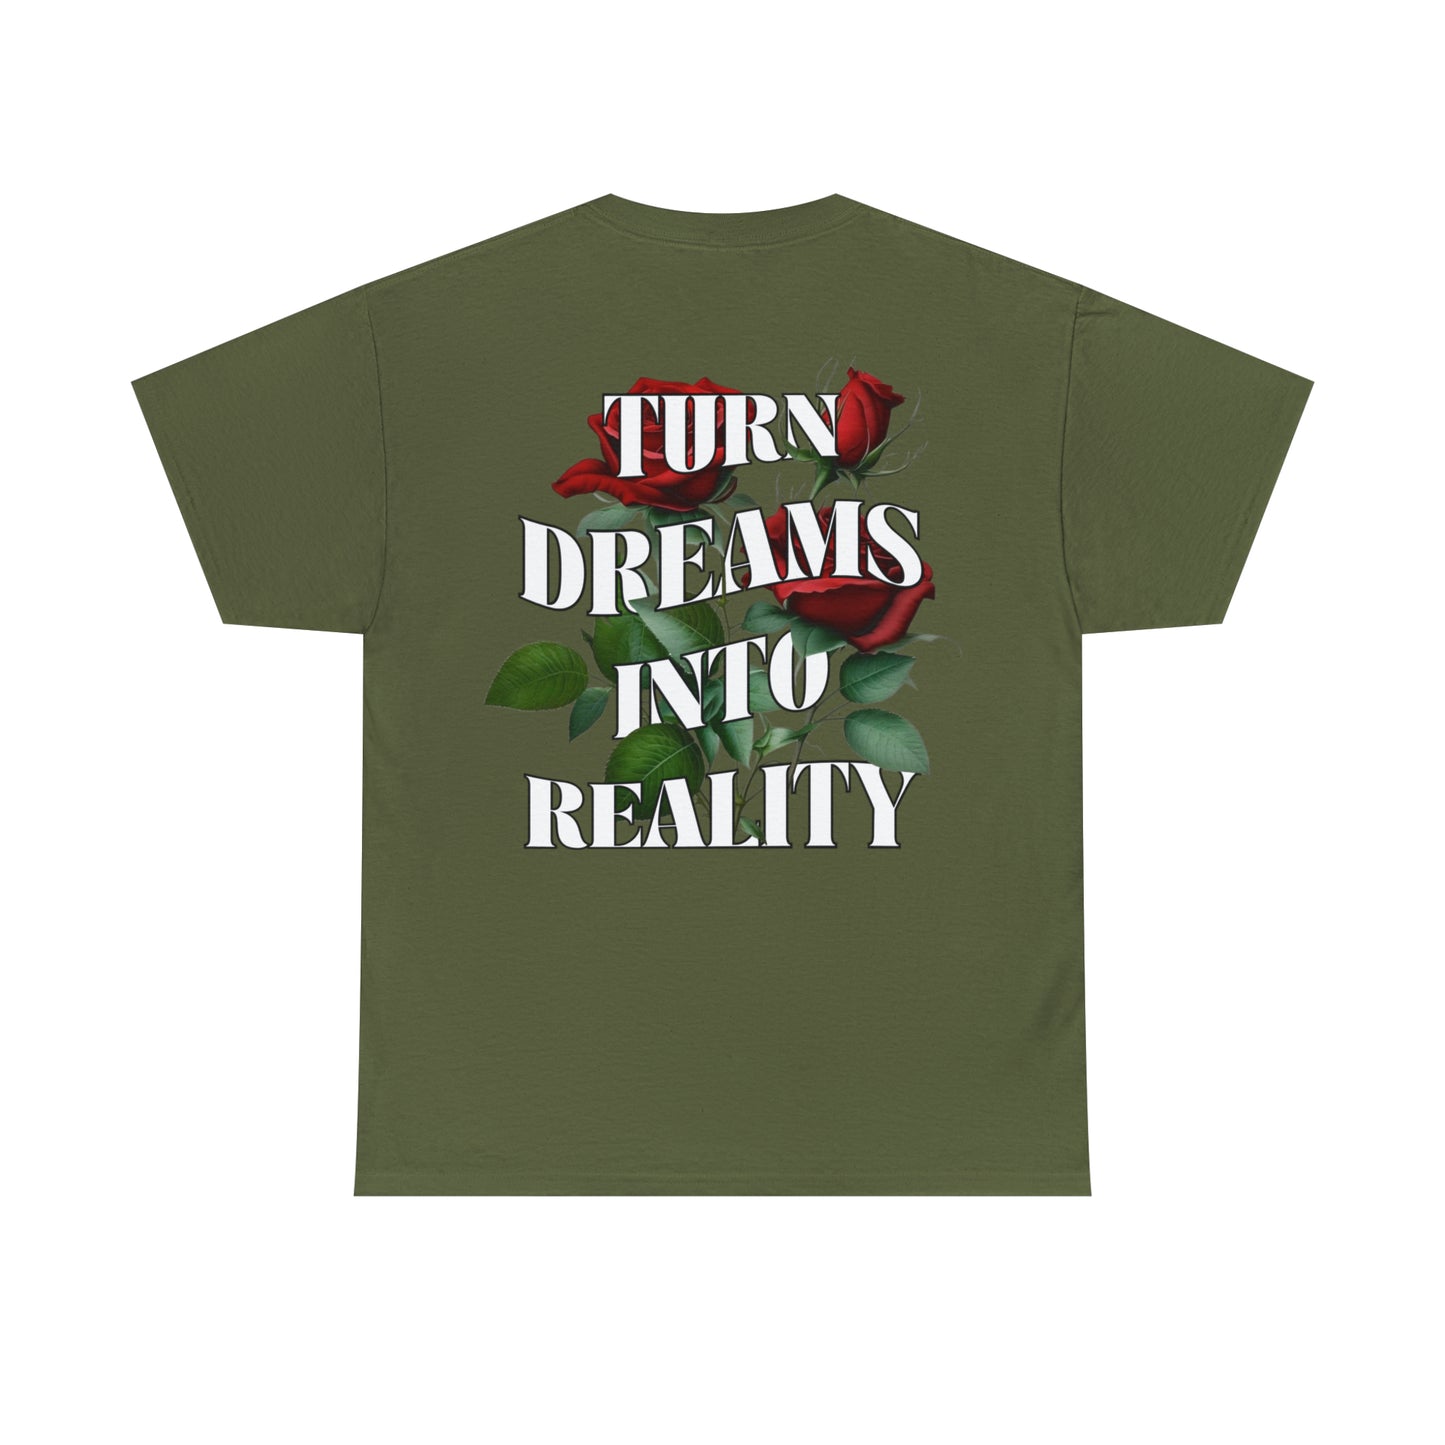 Military Green graphic tee with "Turn Dreams Into Reality" Quote with red roses in between the lettering